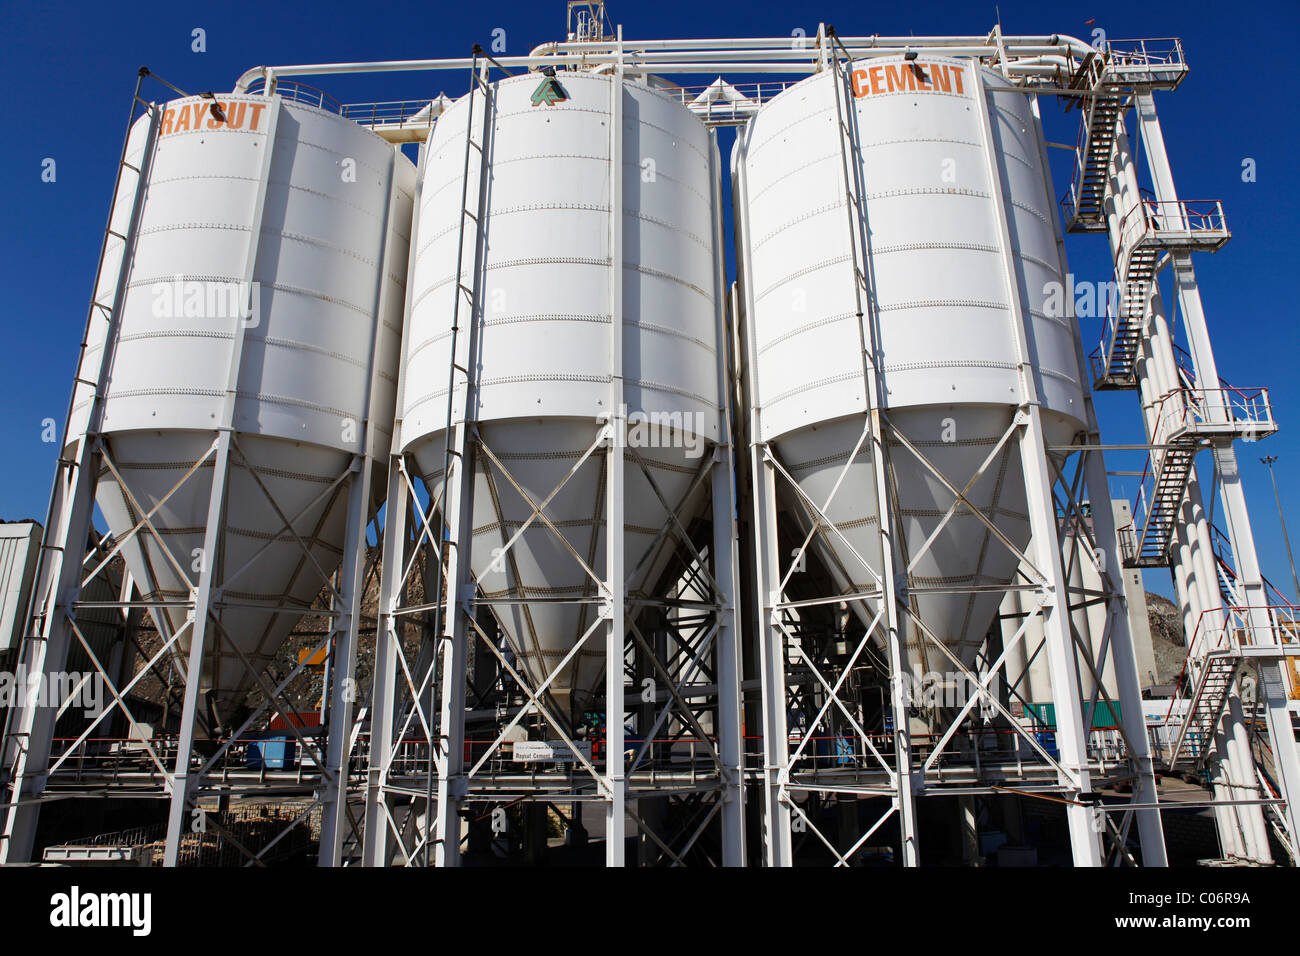 Cement silos in Muscat, Oman Stock Photo - Alamy